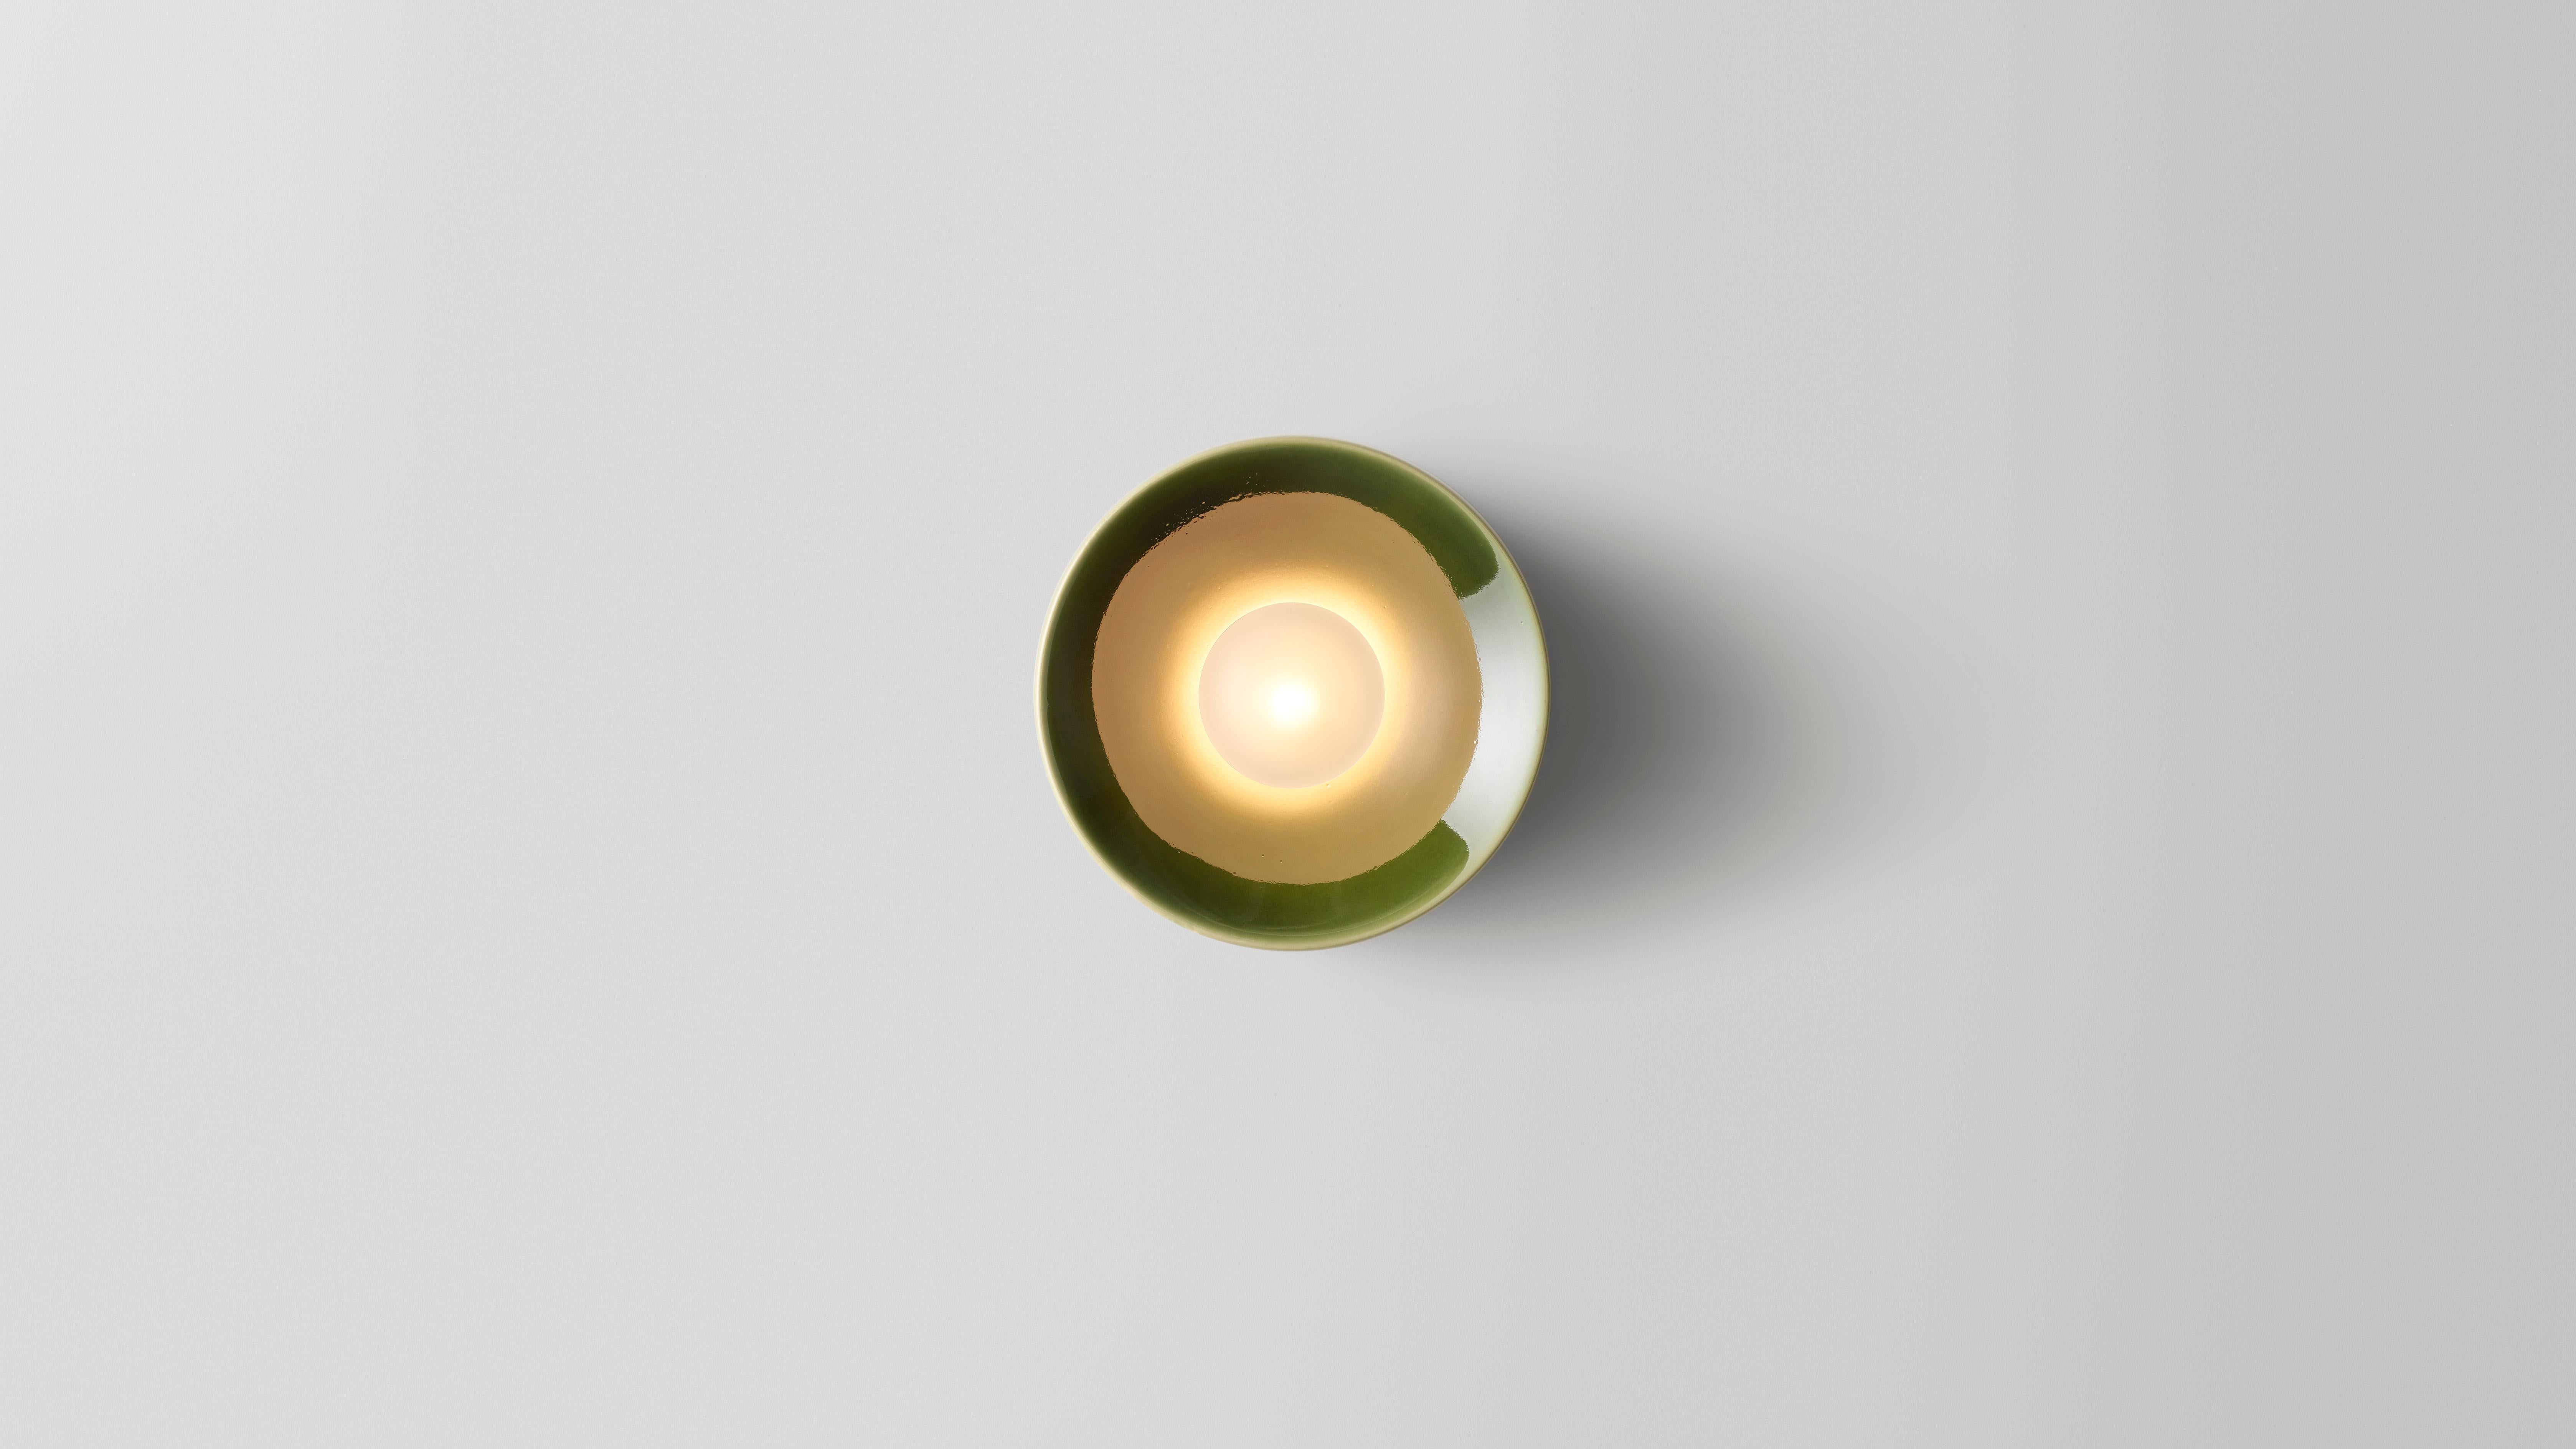 Anton ceramic green lamp by Volker Haug
Dimensions: Ø 18 x D 10 cm. 
Material: Cast Ceramic

Also available in different sizes: Ø 8, 13 or 18 cm. Please contact us.

Glaze: a selection of colors is available
Lamp: G9 LED (110V - 240V) or G4 LED